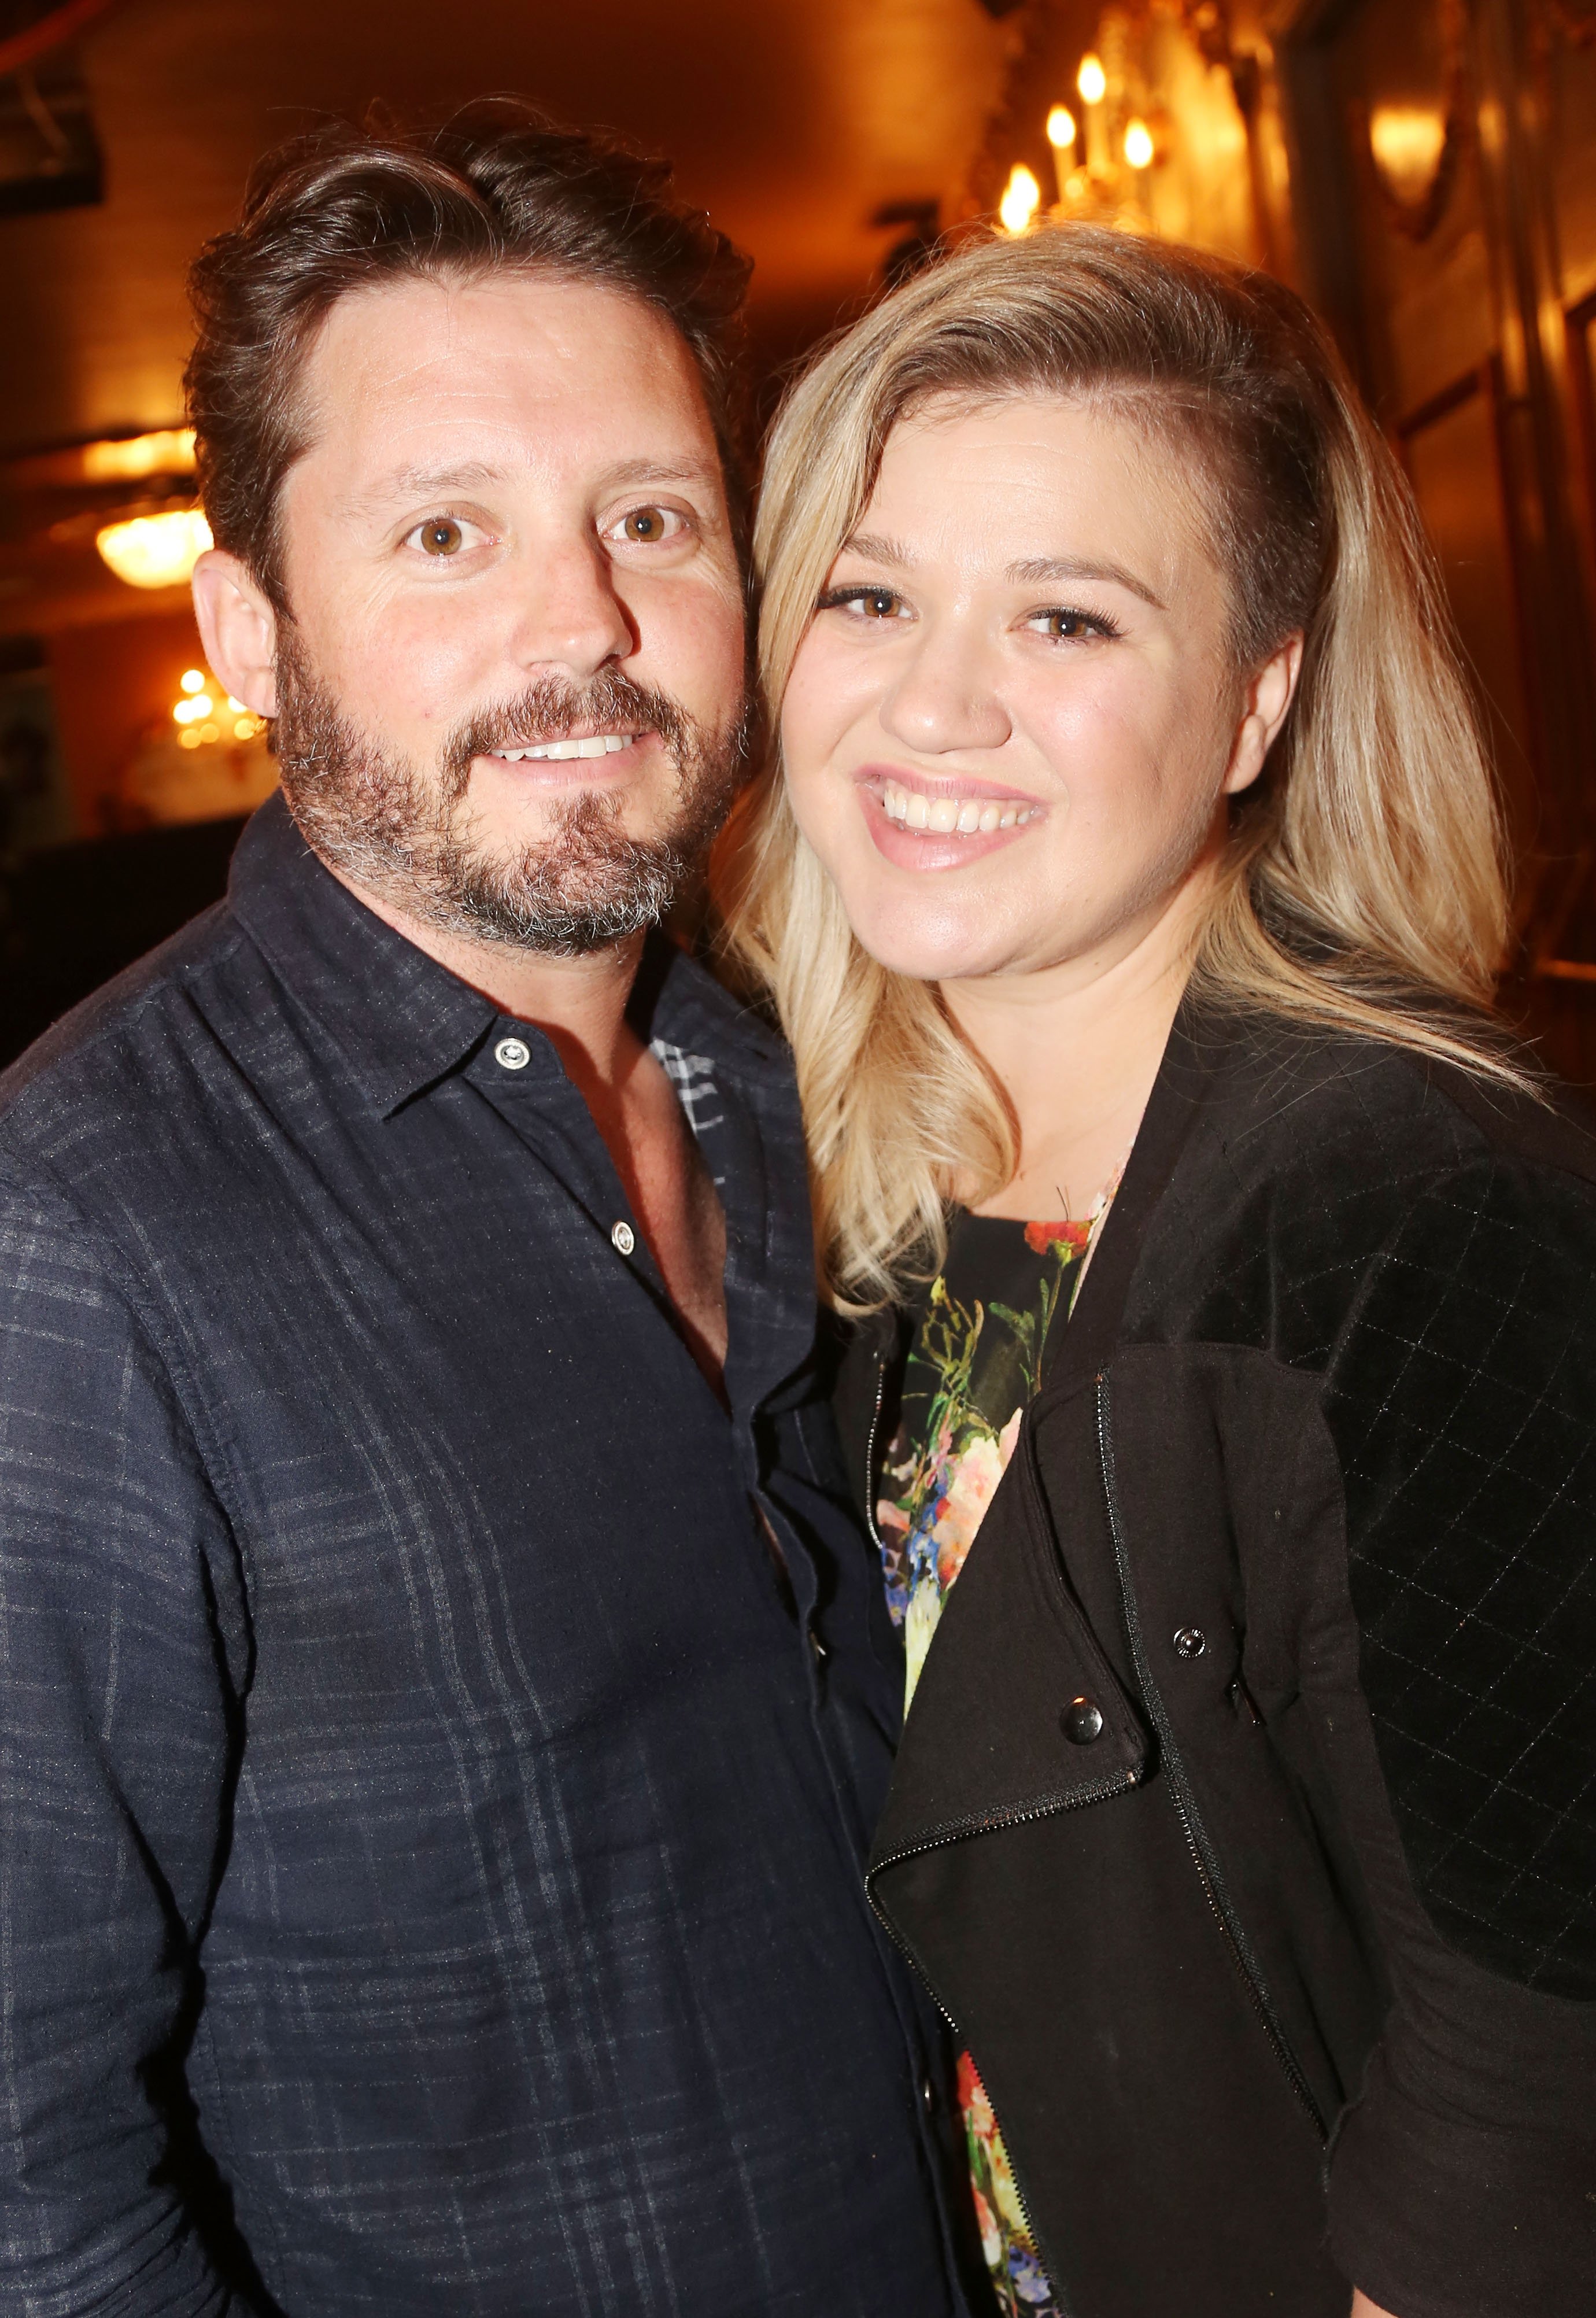 Brandon Blackstock and Kelly Clarkson posing backstage at "Finding Neverland" on Broadway at The Lunt Fontanne Theater on July 15, 2015 in New York City. | Source: Getty Images